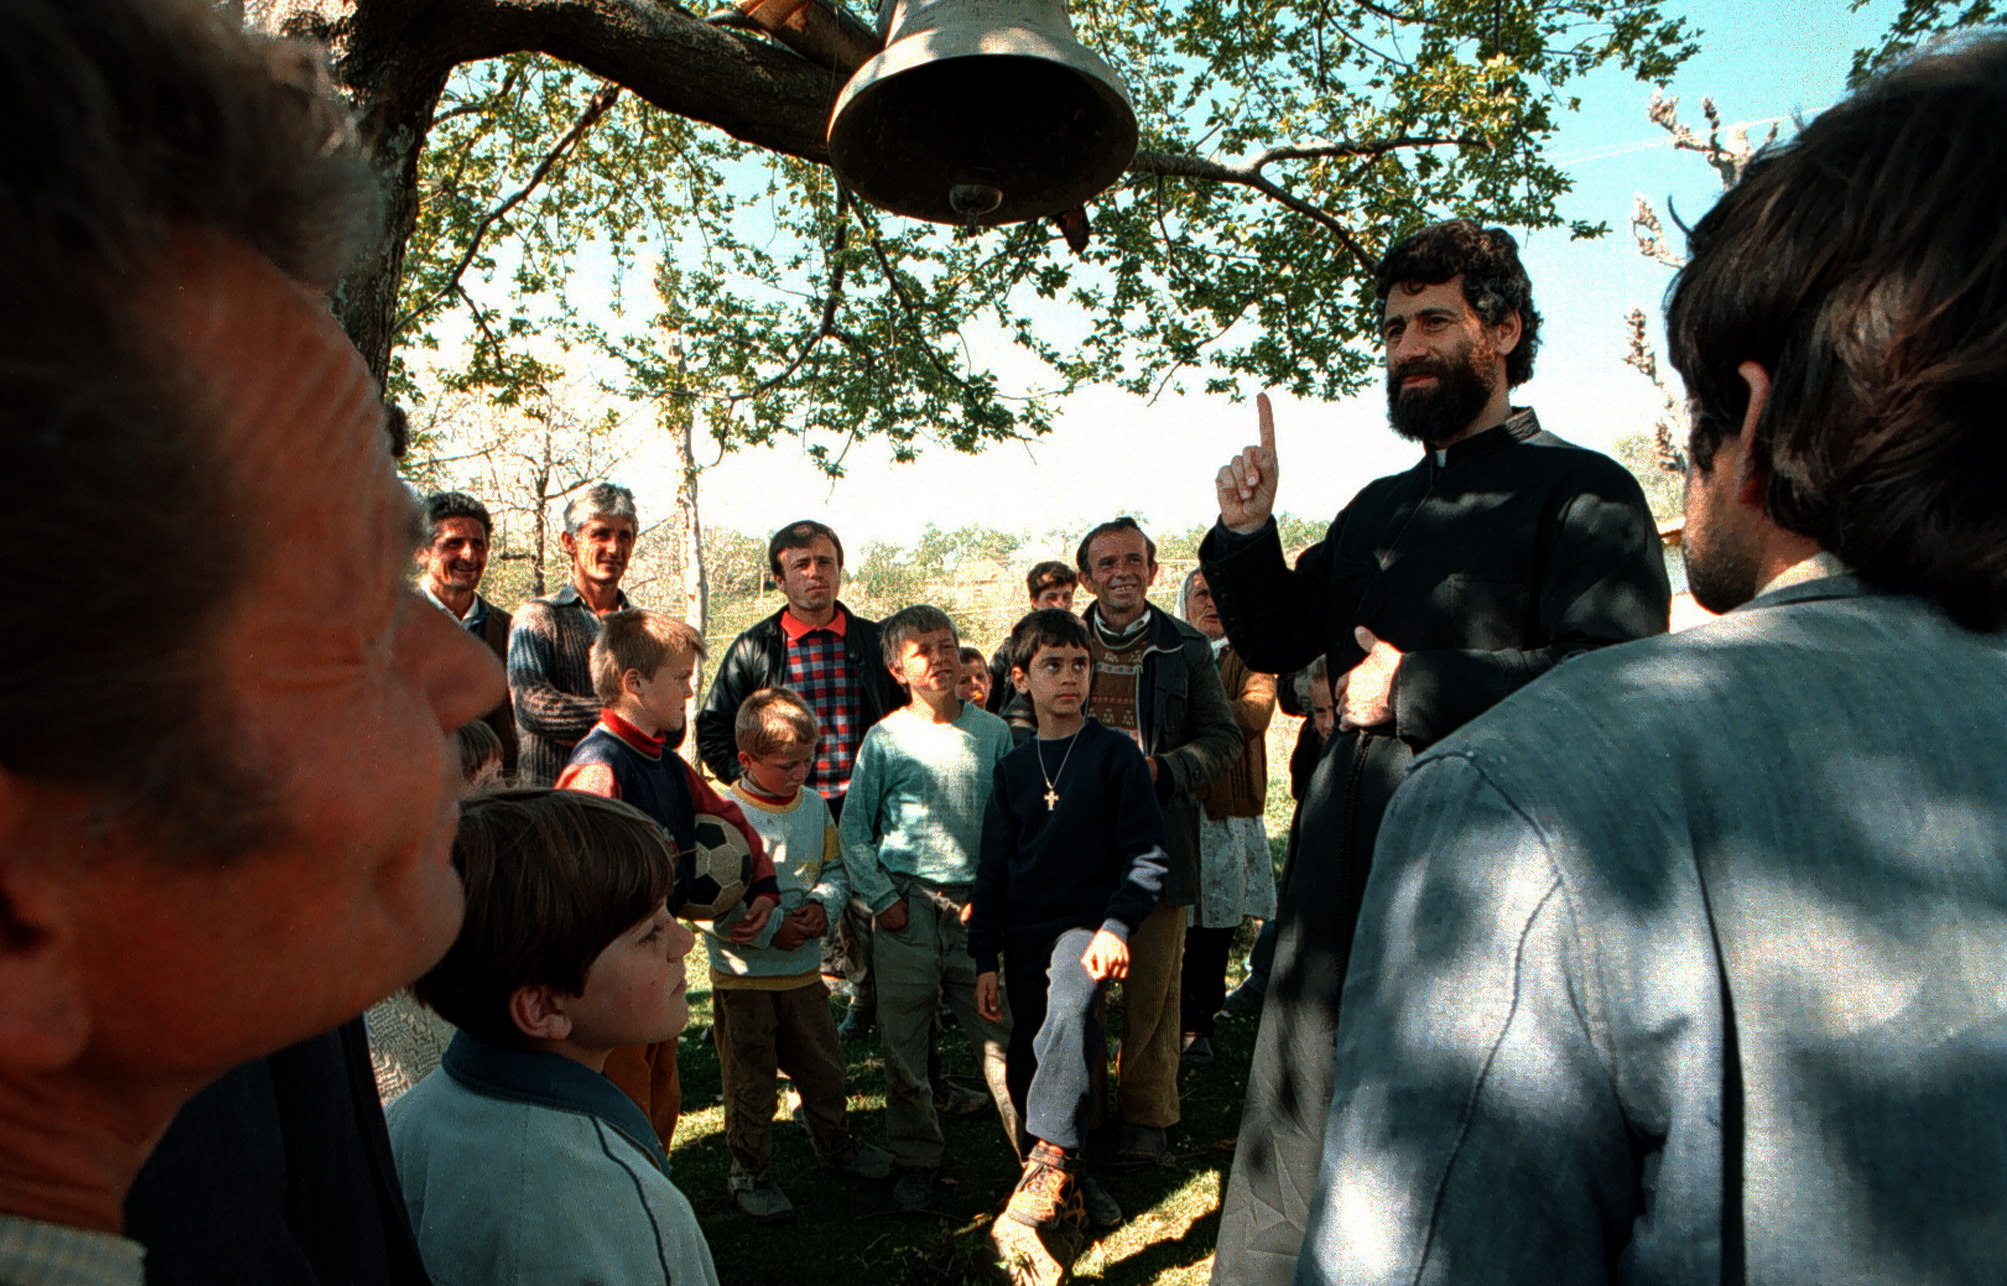  Villagers of Jeronisht gather around Father Martin Ritsi, an orthodox priest from Orange County who move to the Balkan Nation three years ago to help make a difference in their lives. ©Gail Fisher Los Angeles Times 